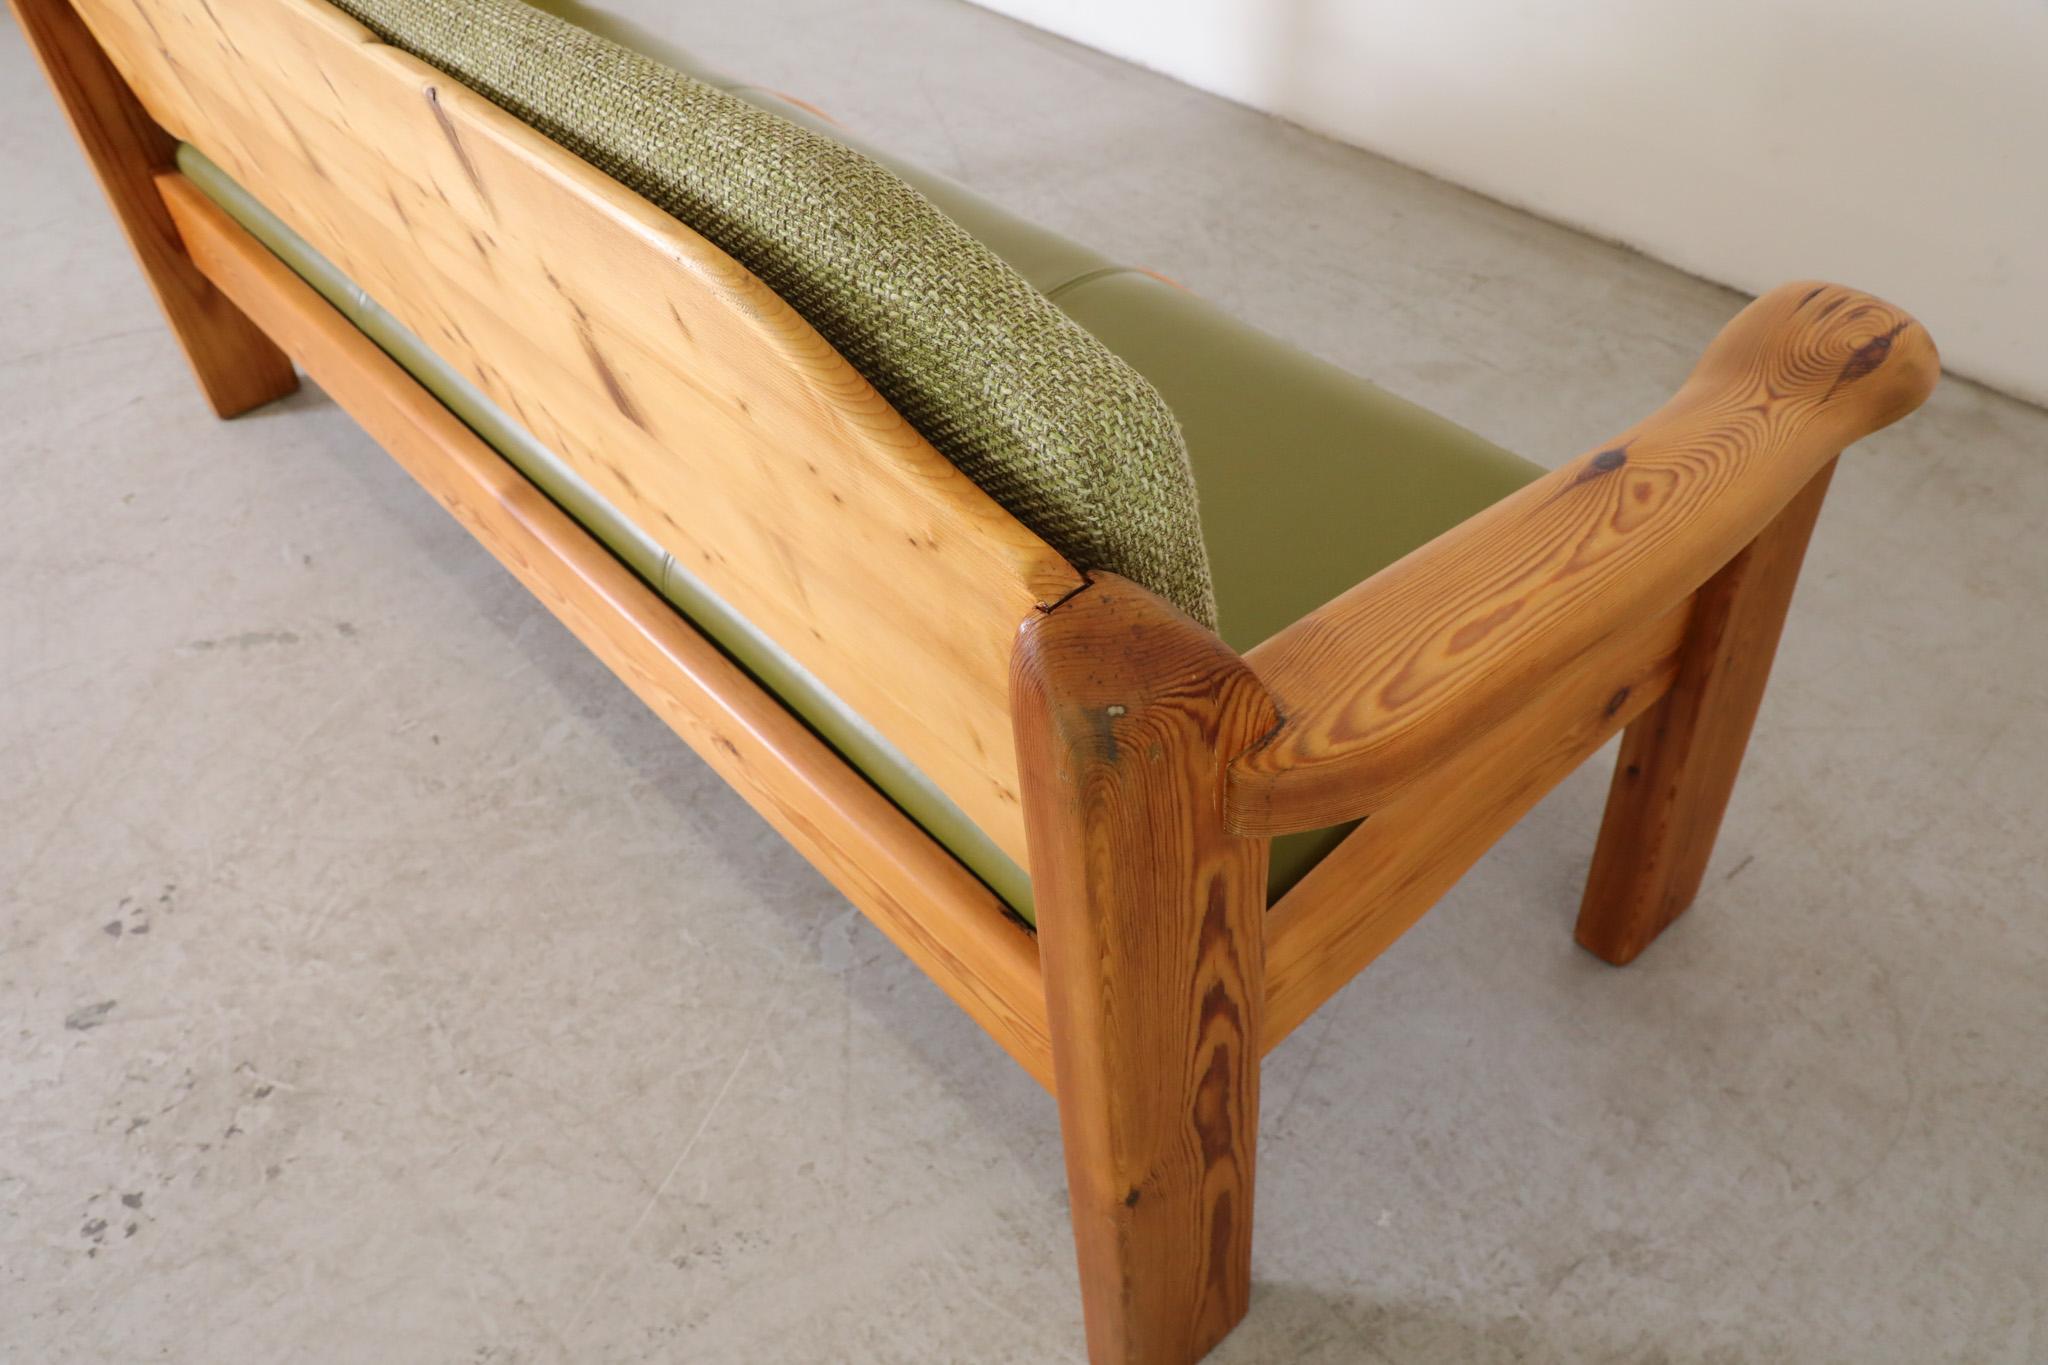 Ate van Apeldoorn Inspired Pine Bench with Green Cushions & Hand Carved Details 2